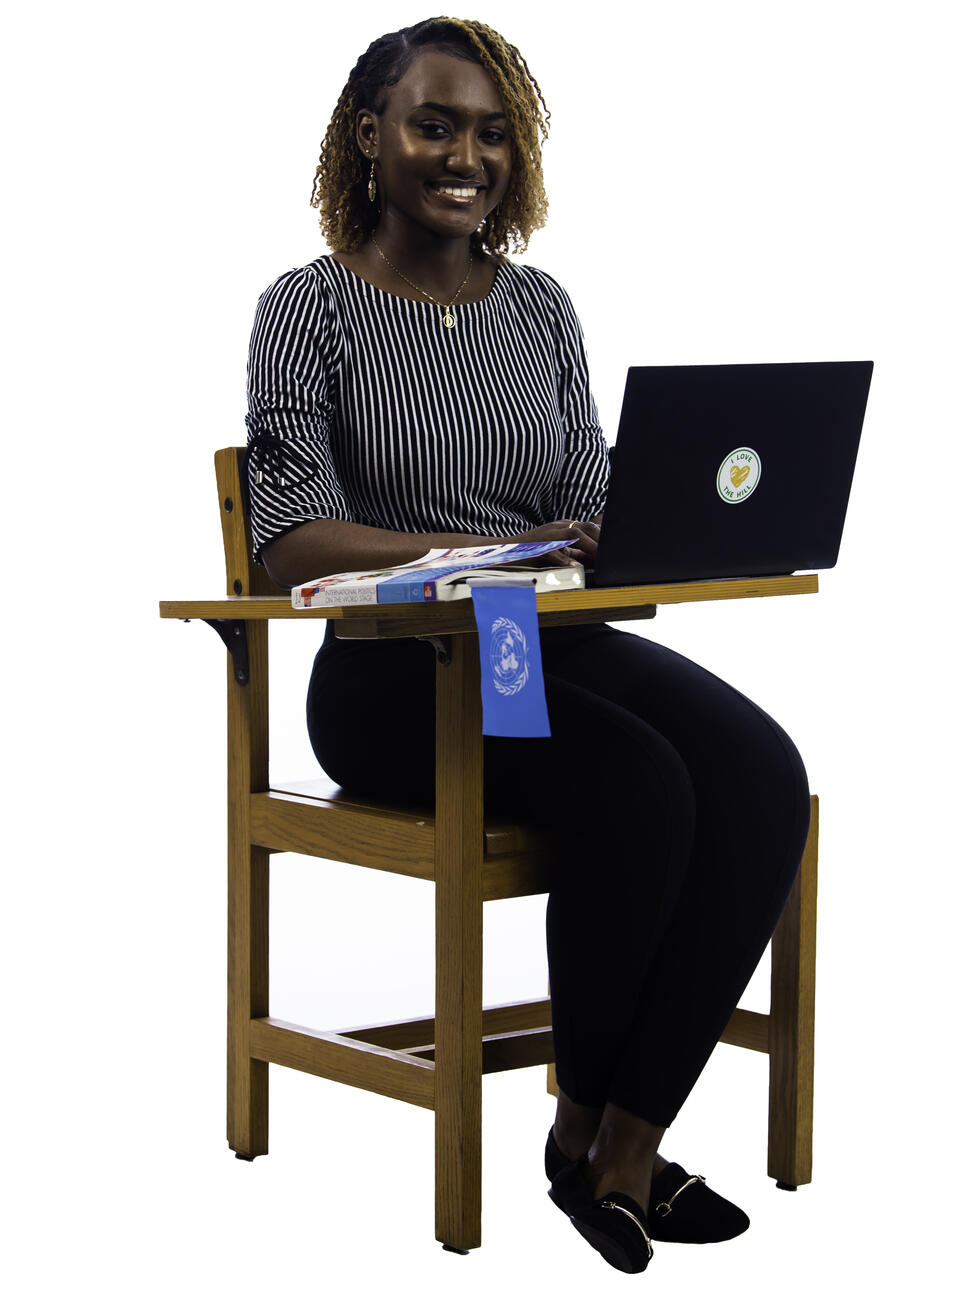 Dalanda Diallo sitting at a desk with a laptop and books.